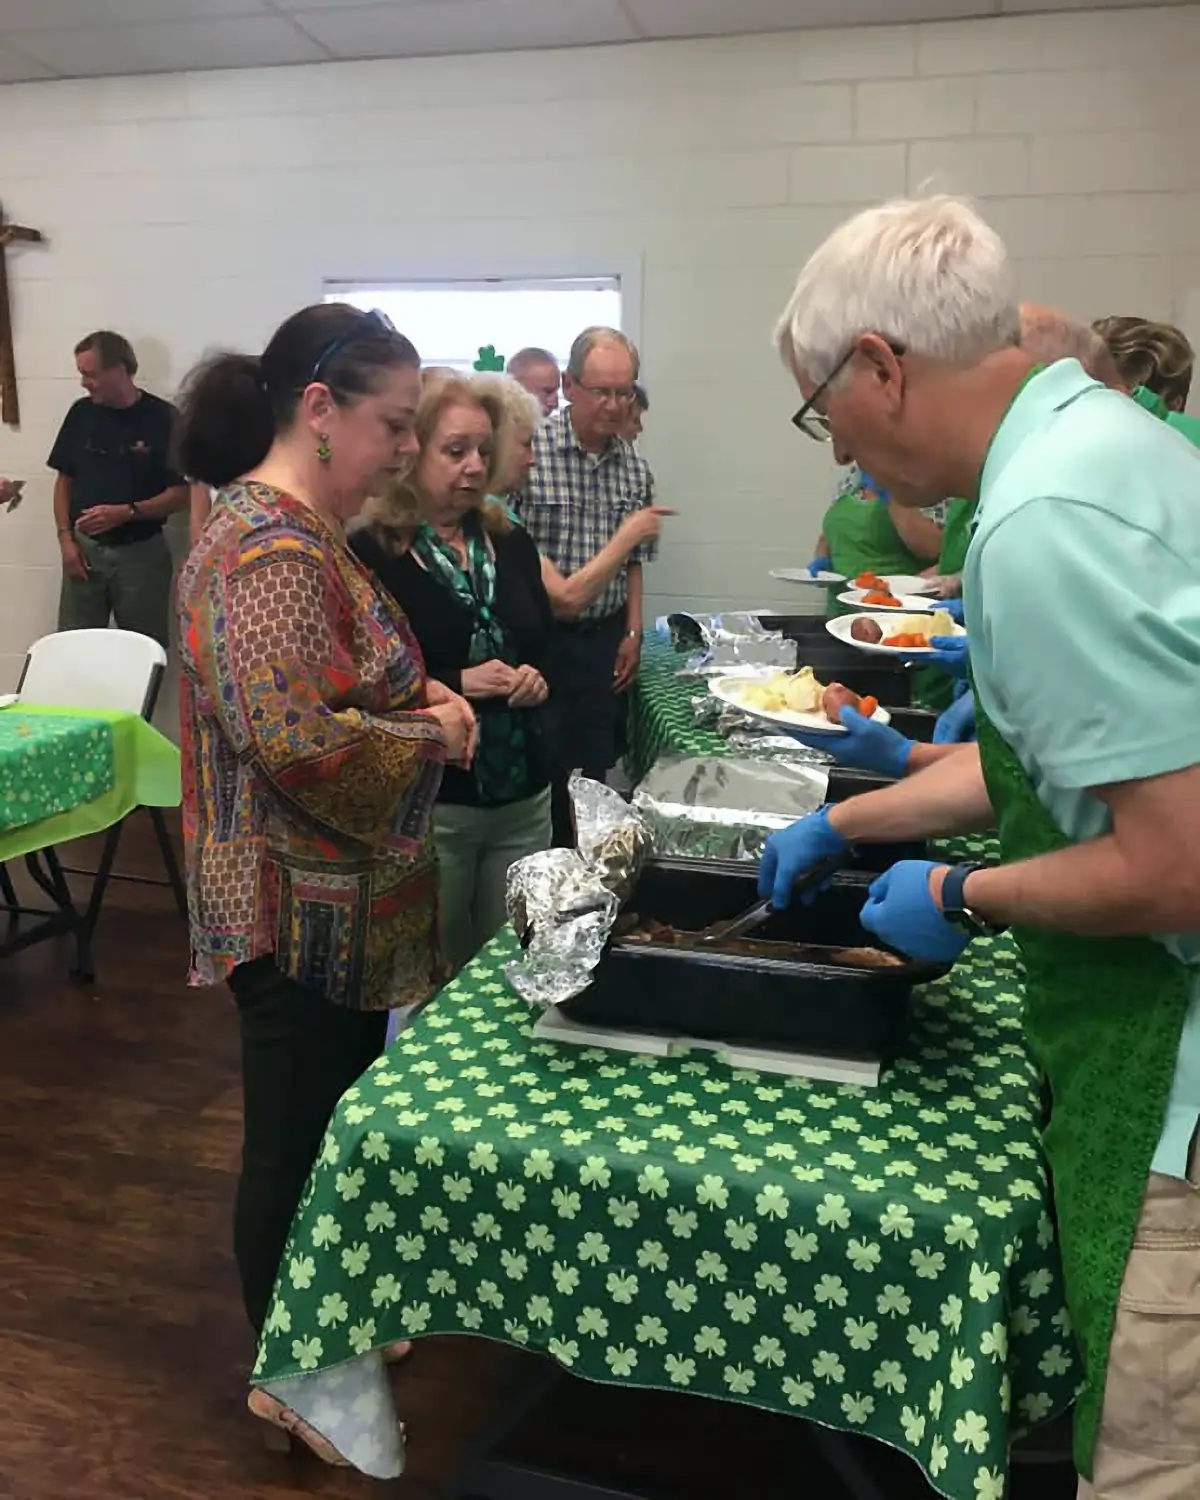 Volunteers Mel & Mike serving dinner at St. Patrick's Day Event